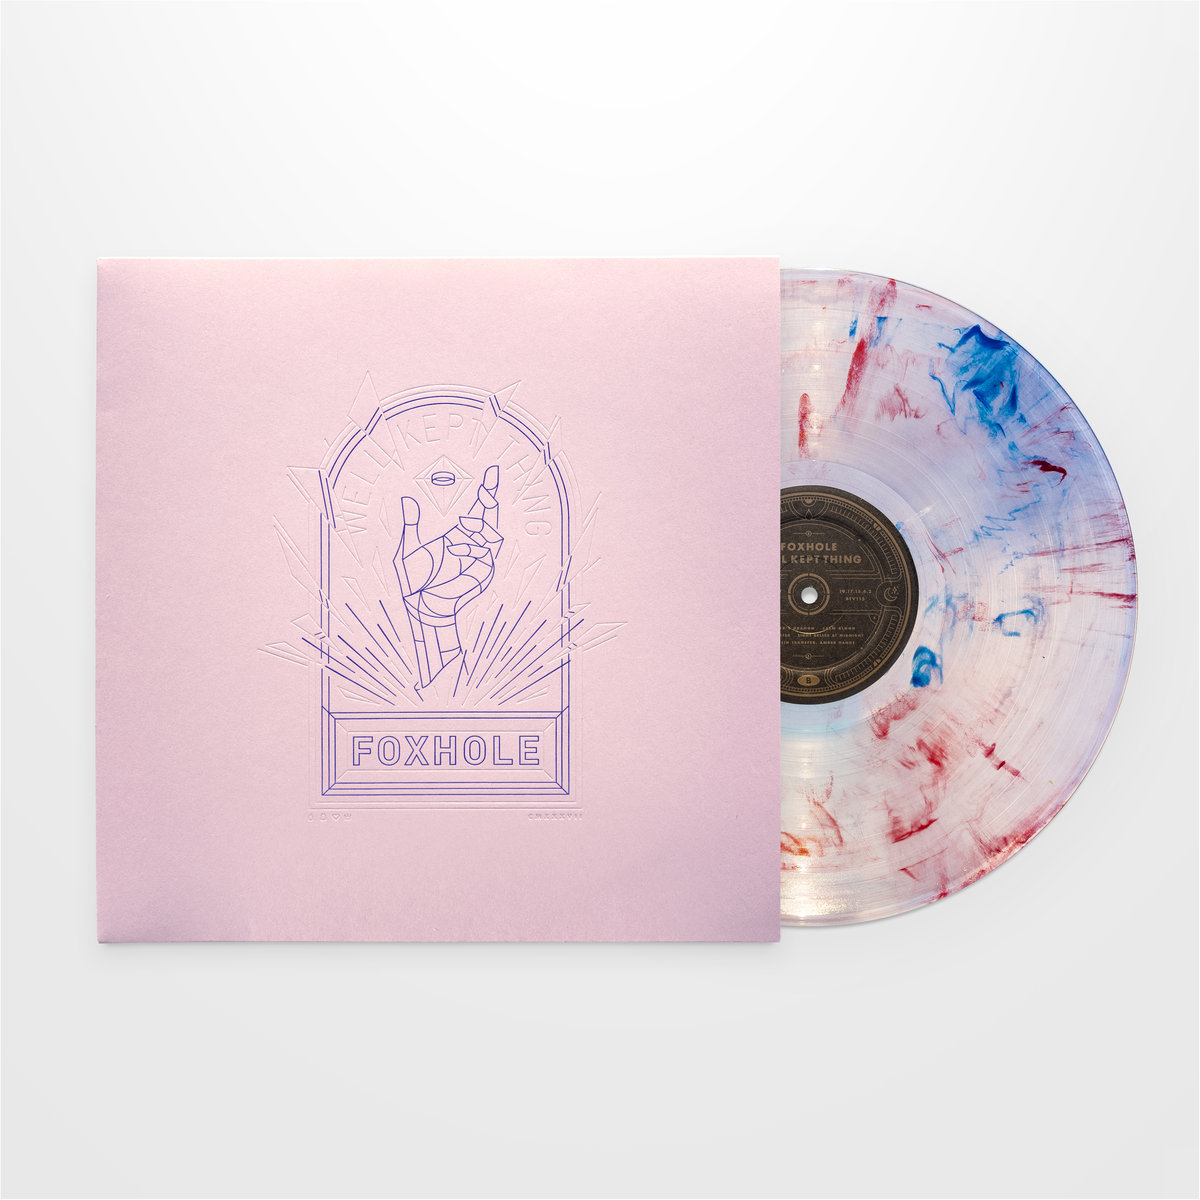 Badass Bands and their Pink Vinyl Records - UnifiedManufacturing